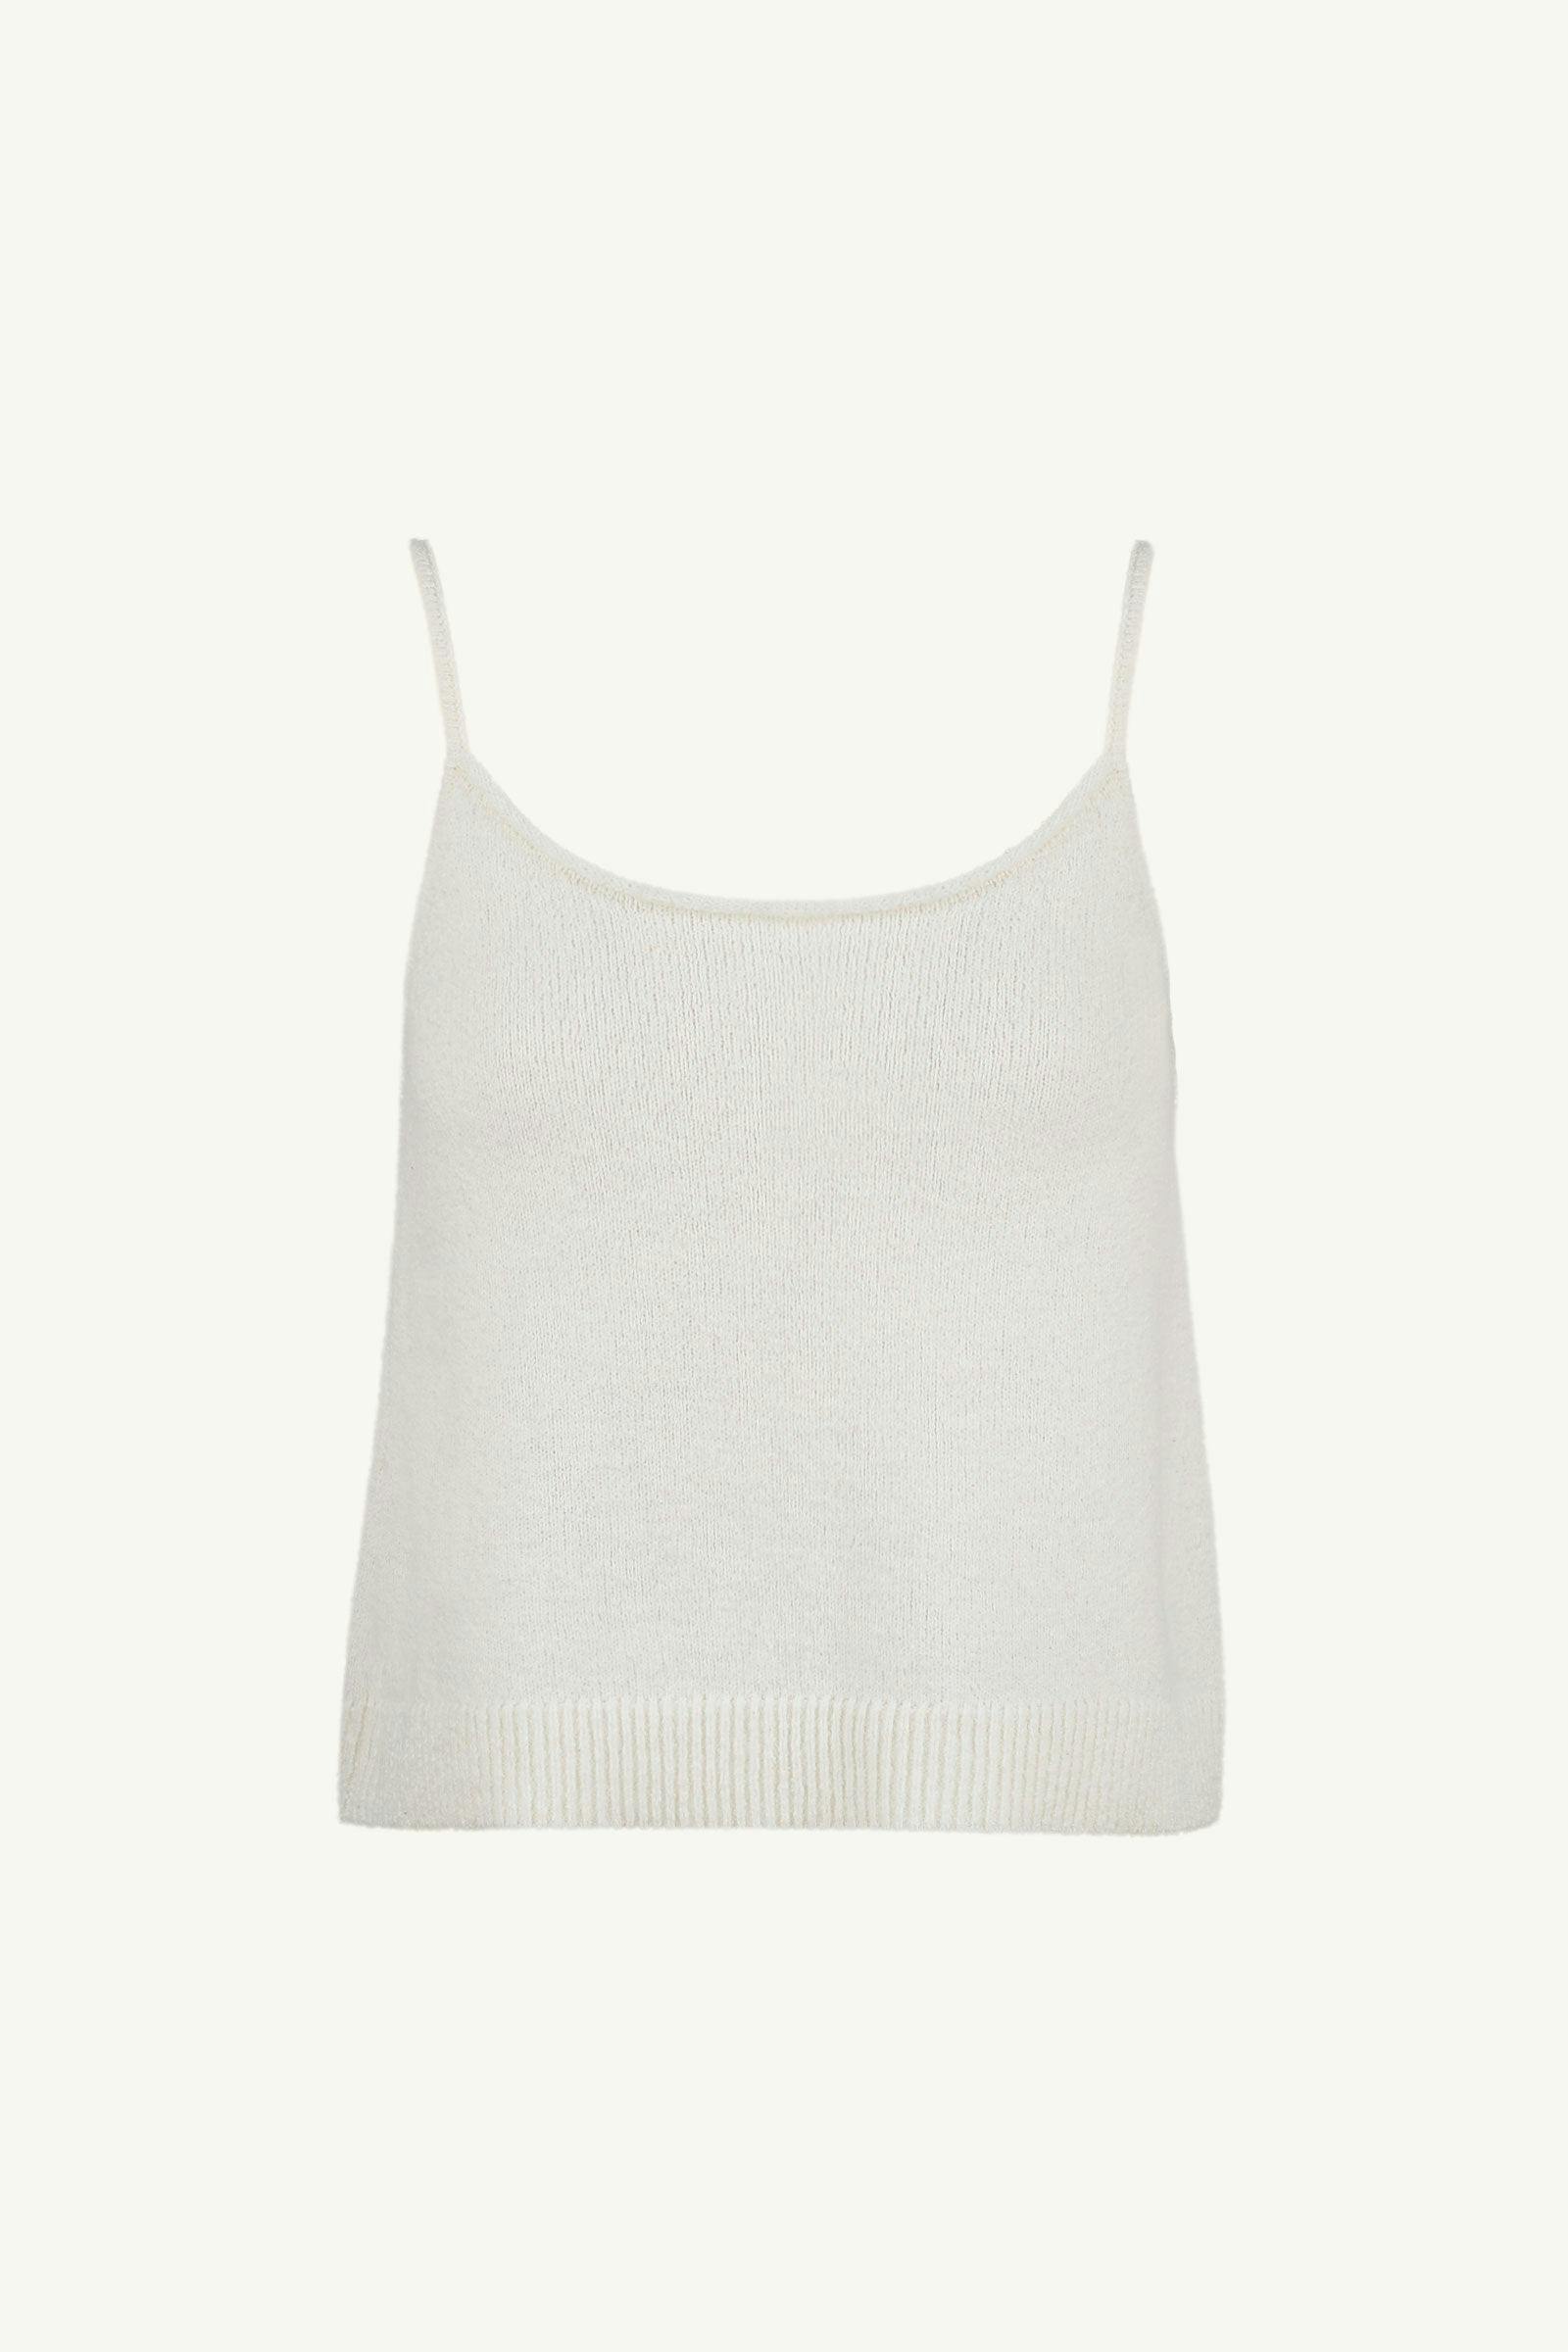 Cotton Boucle Knit Top - Tops - Clothing